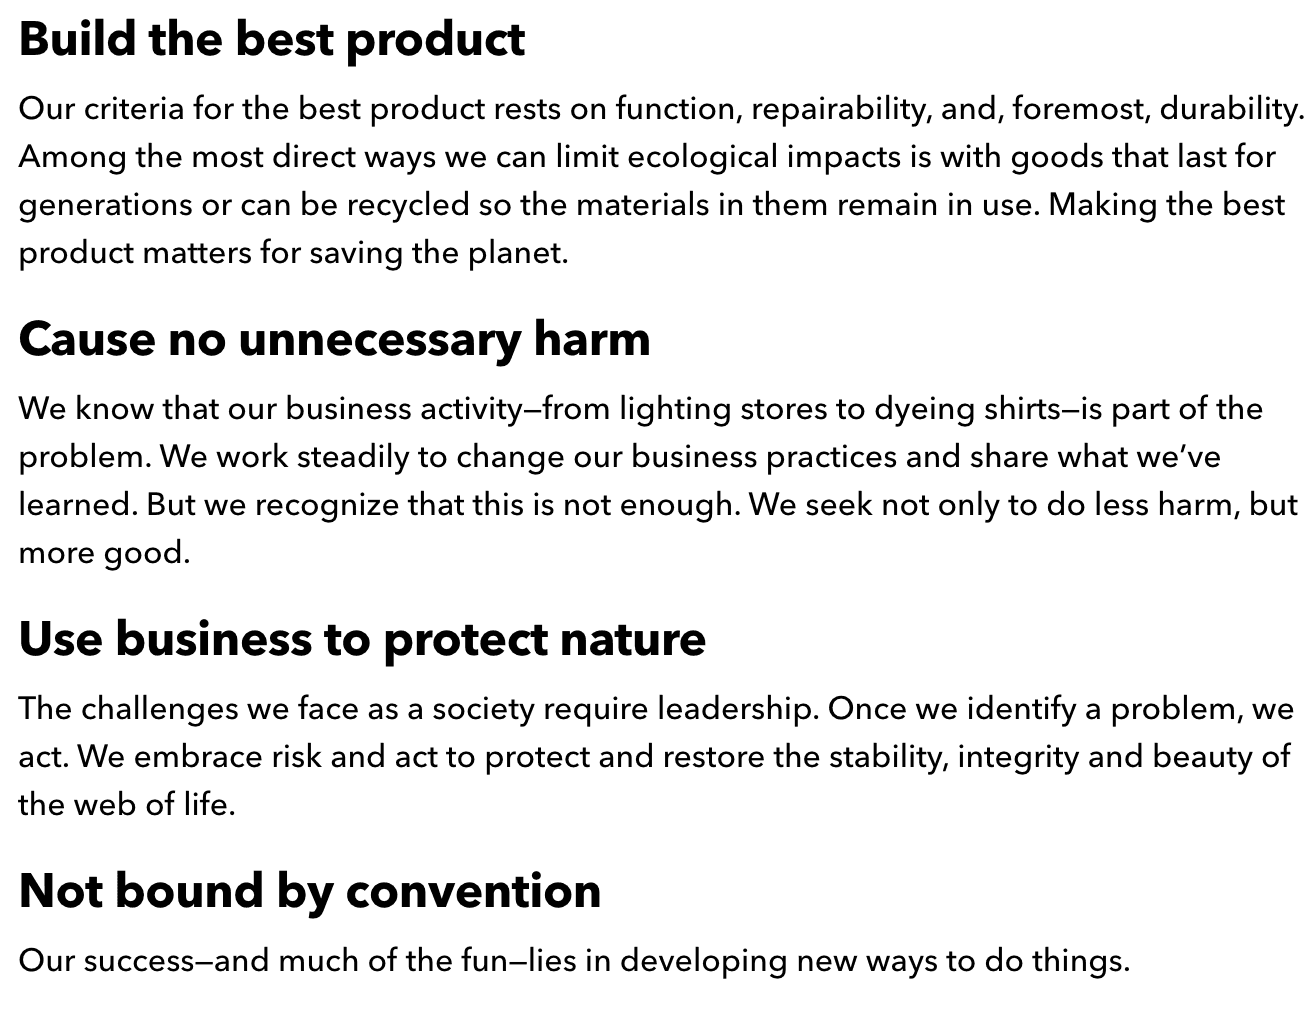 The four values of Patagonia listed as to build the best product, cause no unnecessary harm, use business to protect nature, and not bound by convention.